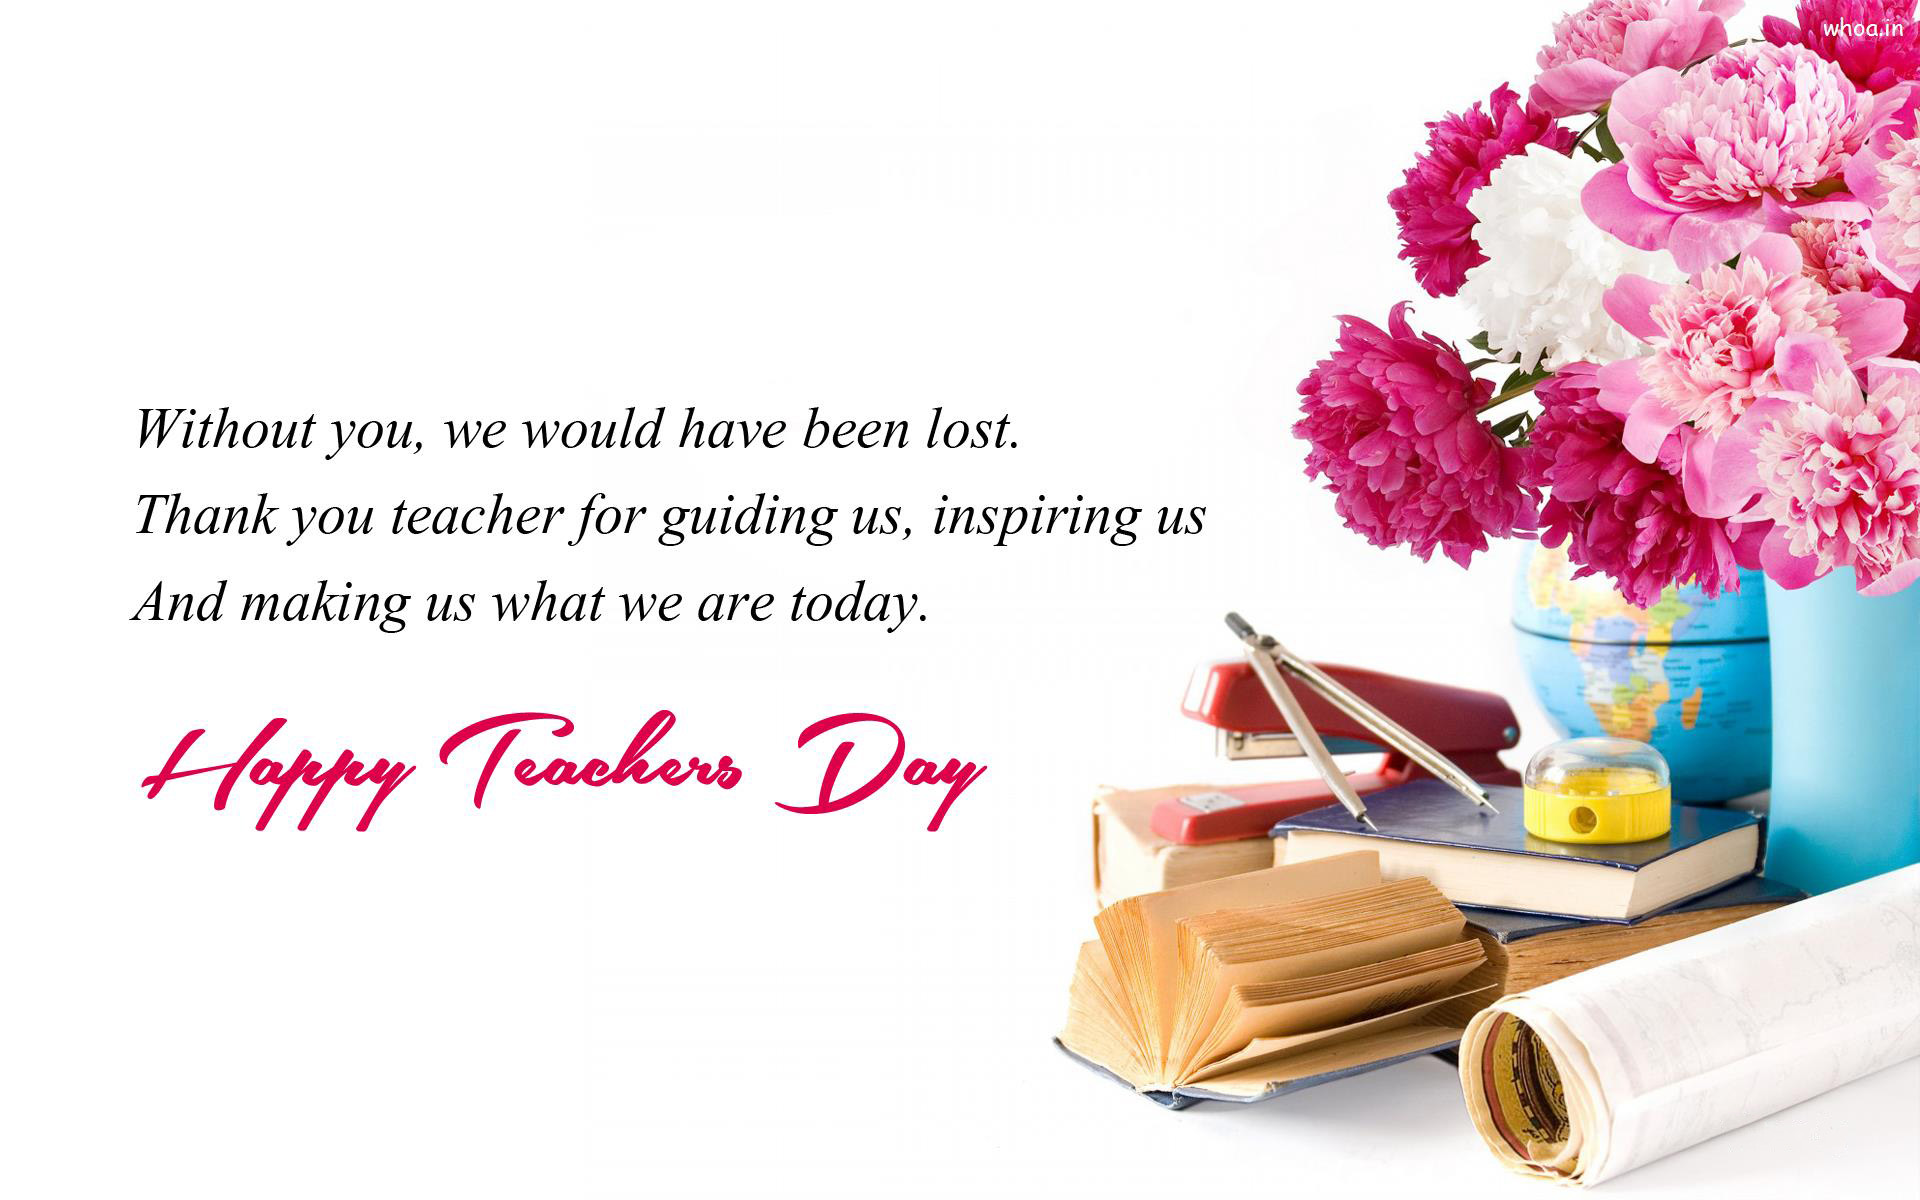 53+ Teachers Day Quotes Images To Download In HD Format